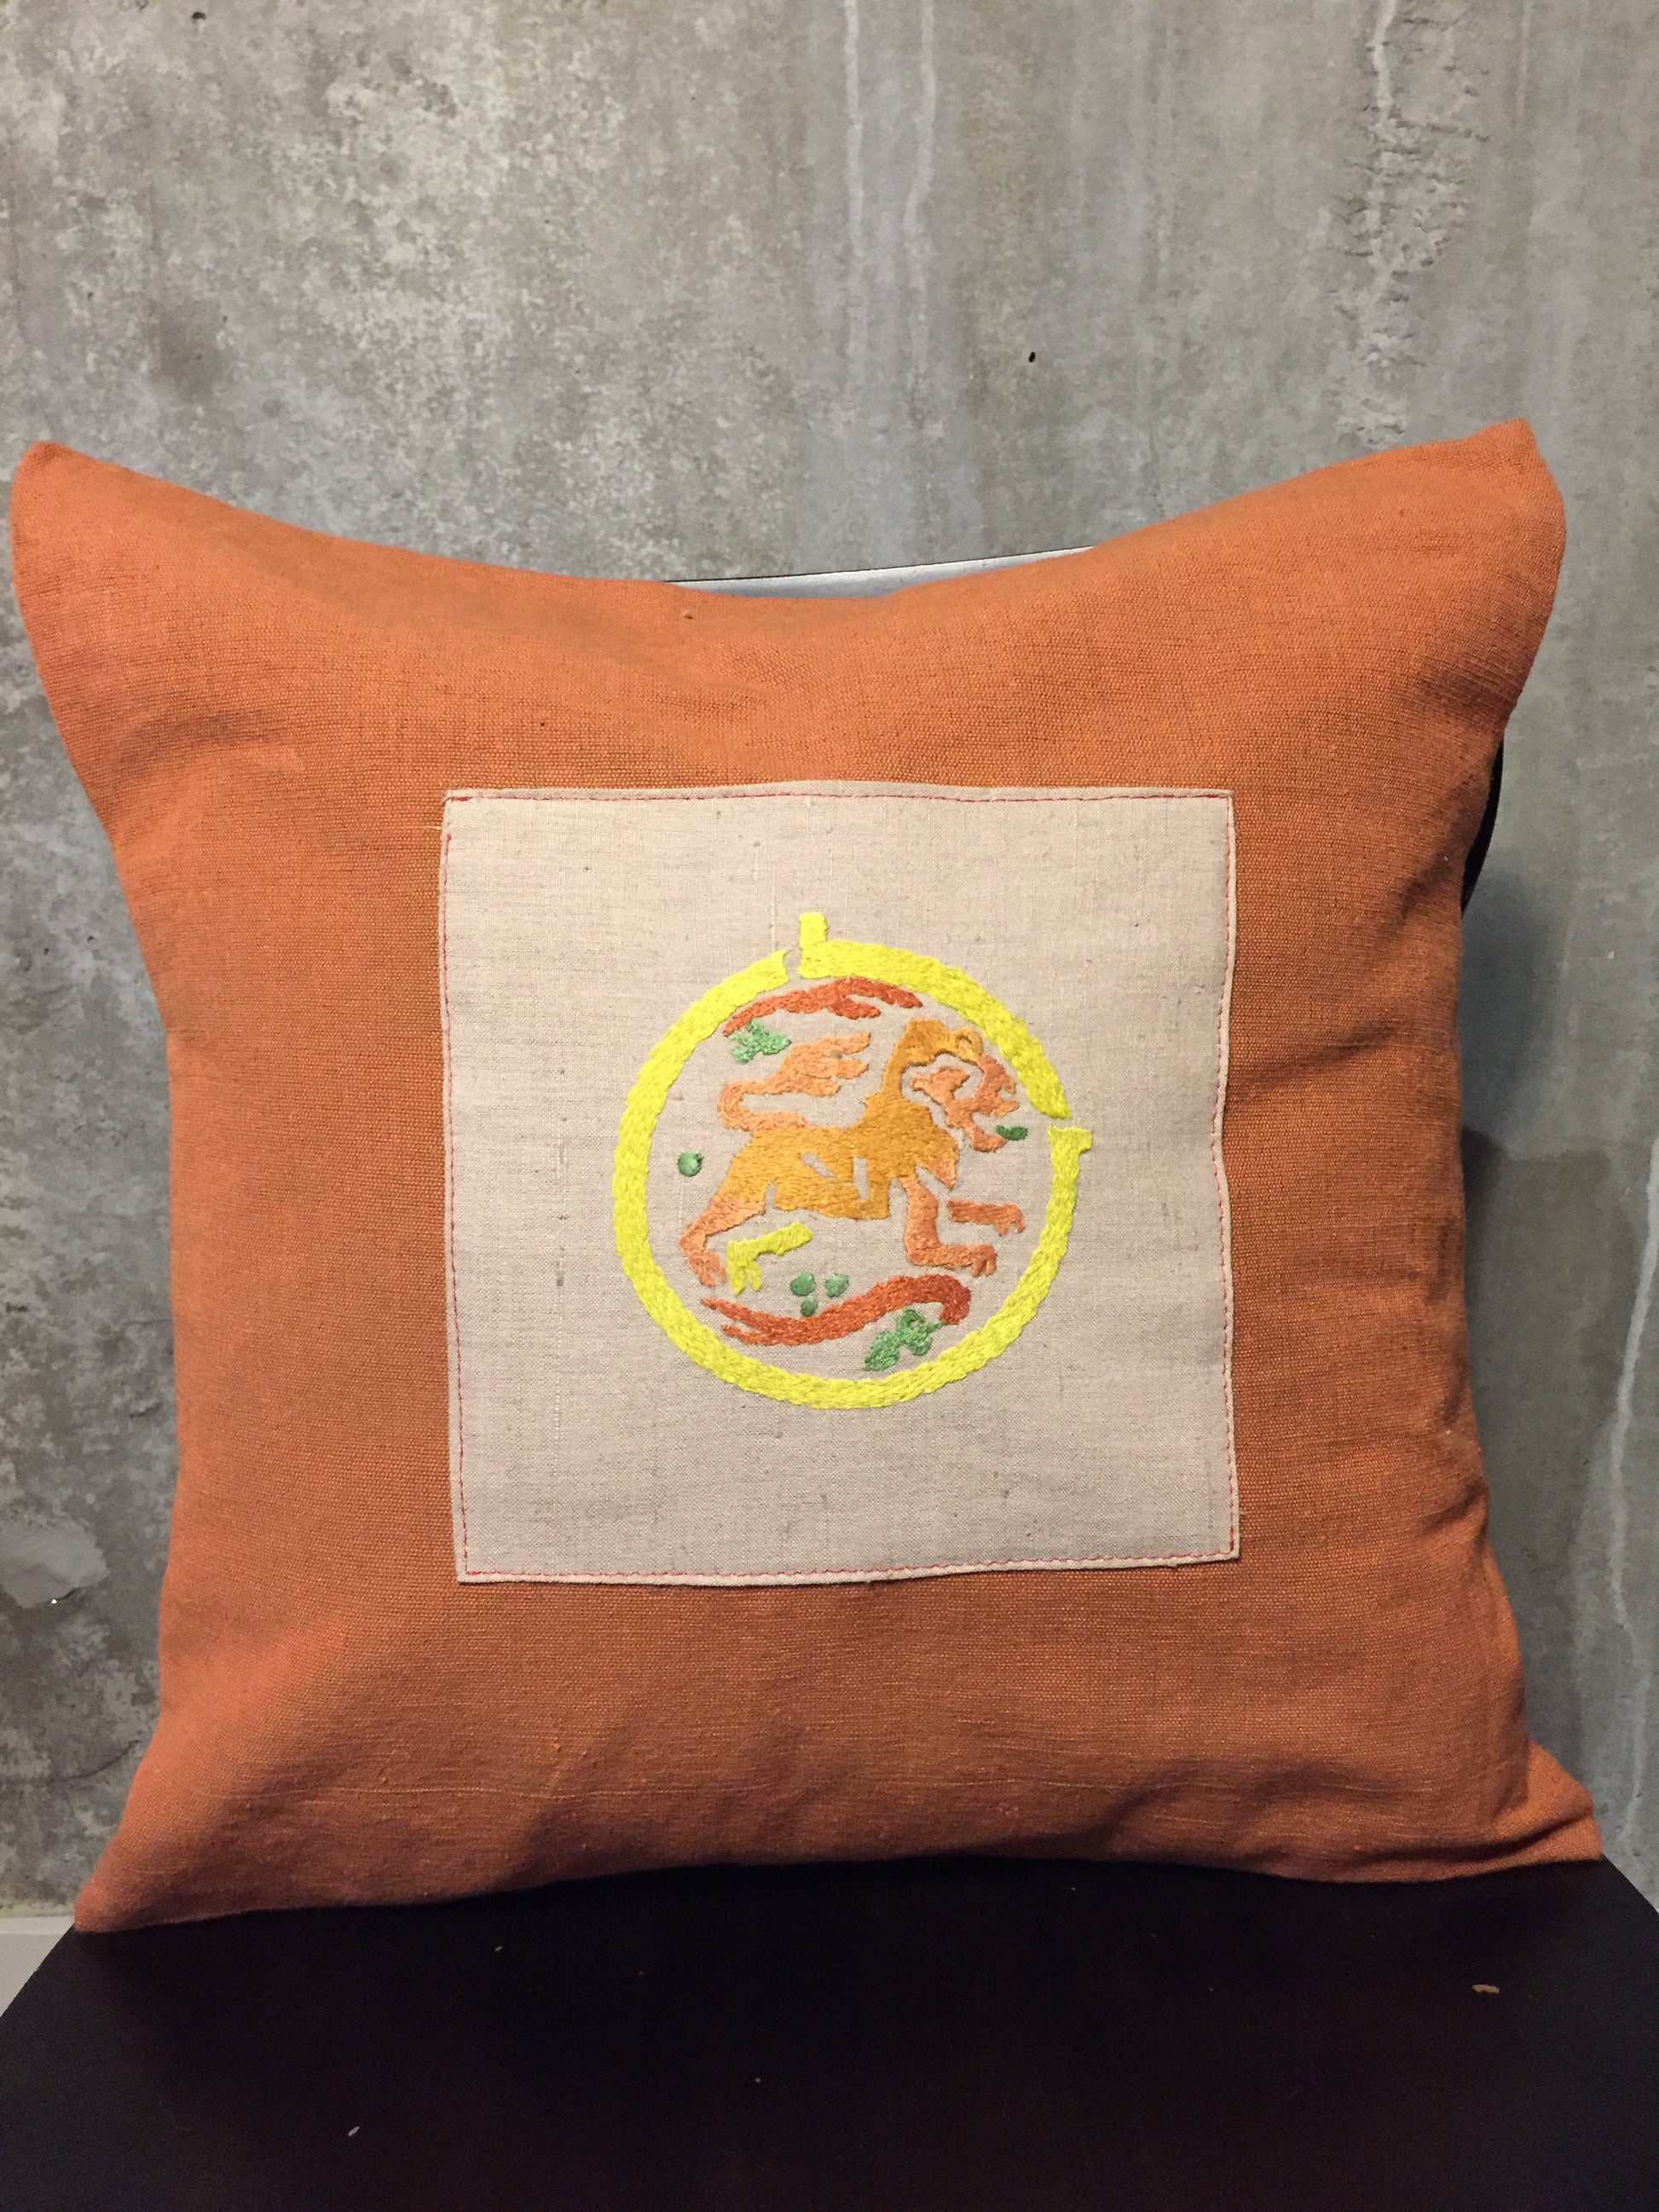 Handwoven Egyptian Cotton Cushion Cover - Hand Embroidered Art - Lion Motif